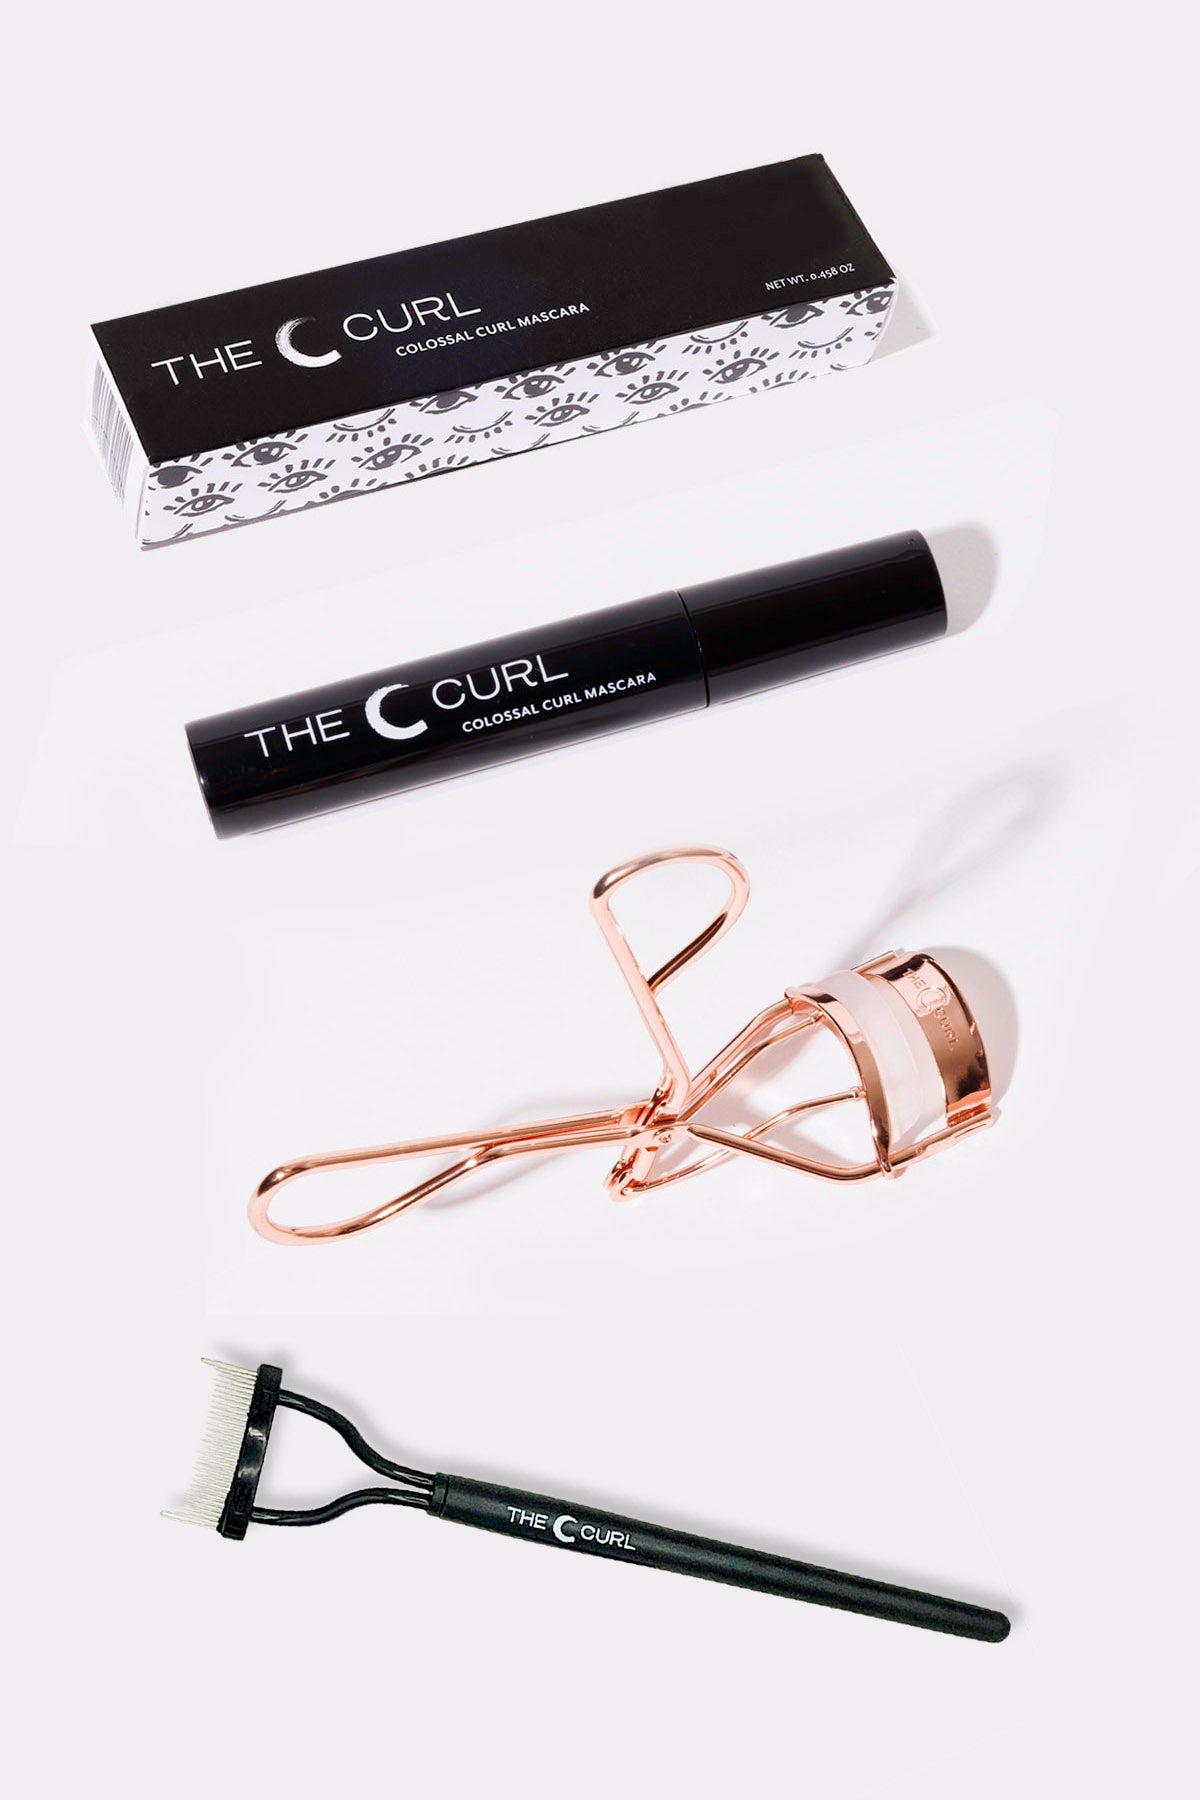 The Kit - The C Curl, Colossal Curl Mascara + Comb + free shipping